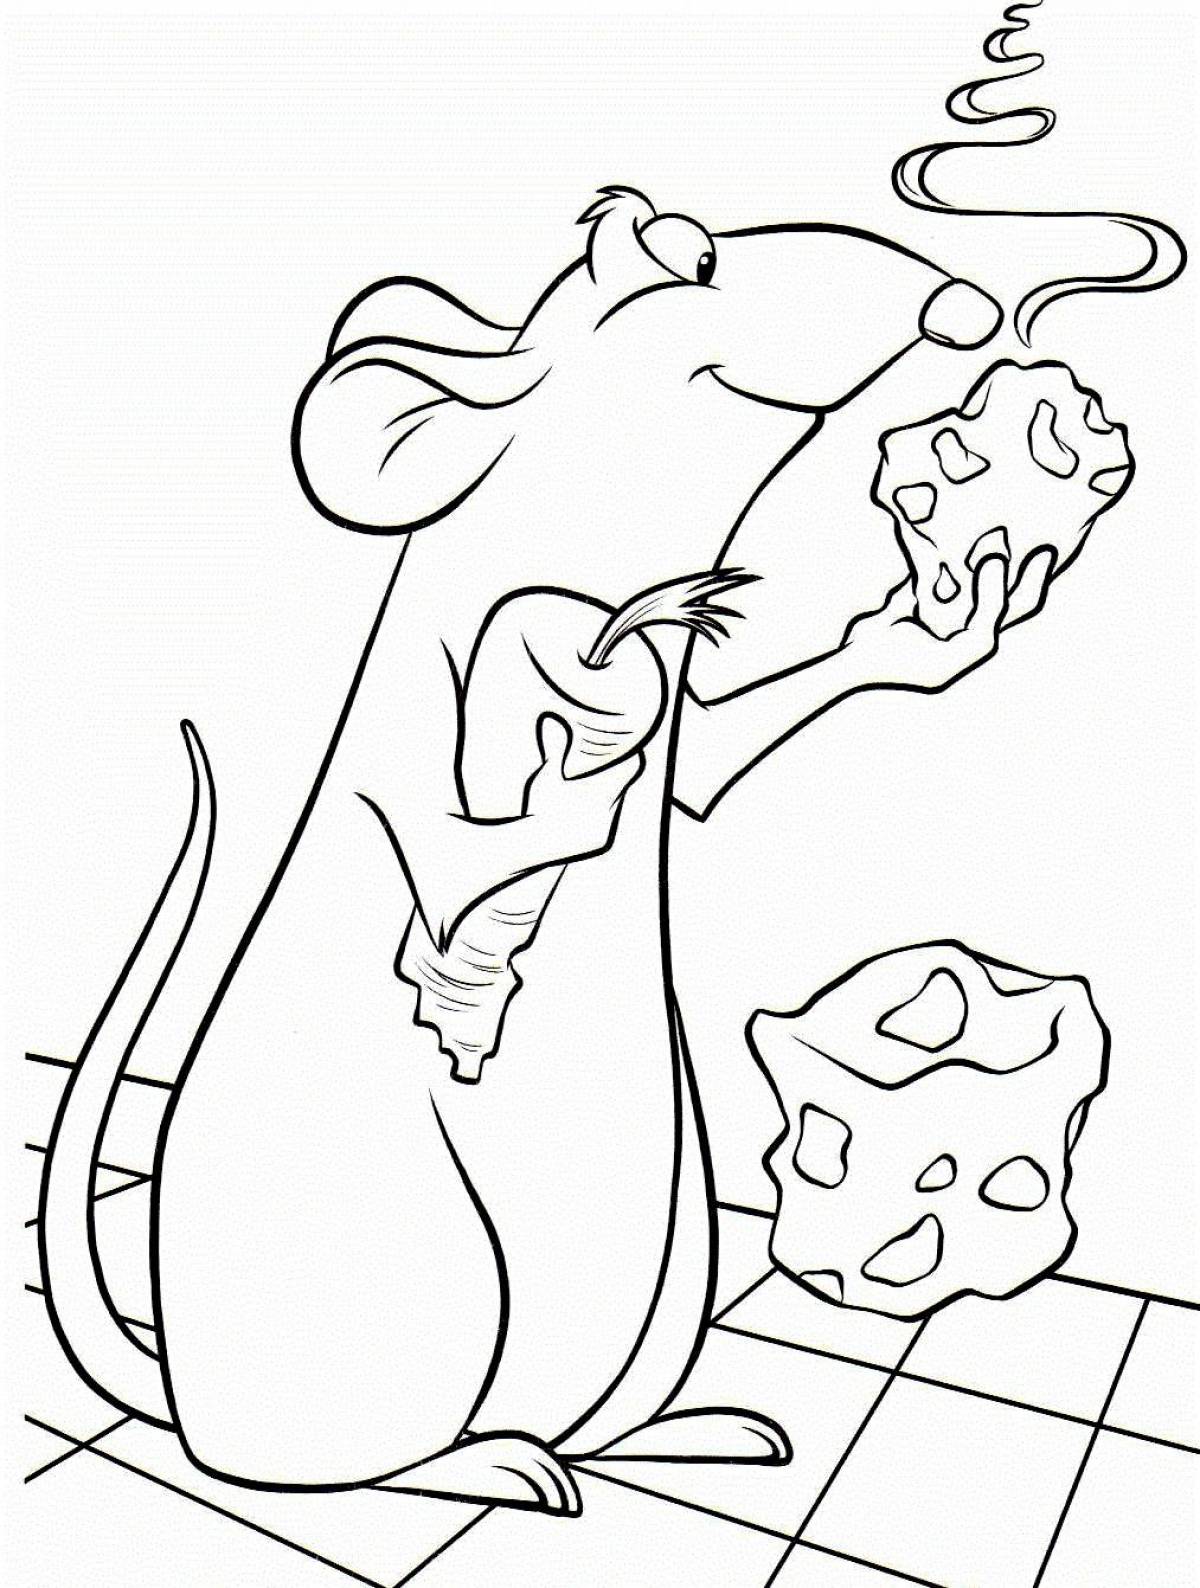 Glorious ratatouille coloring page